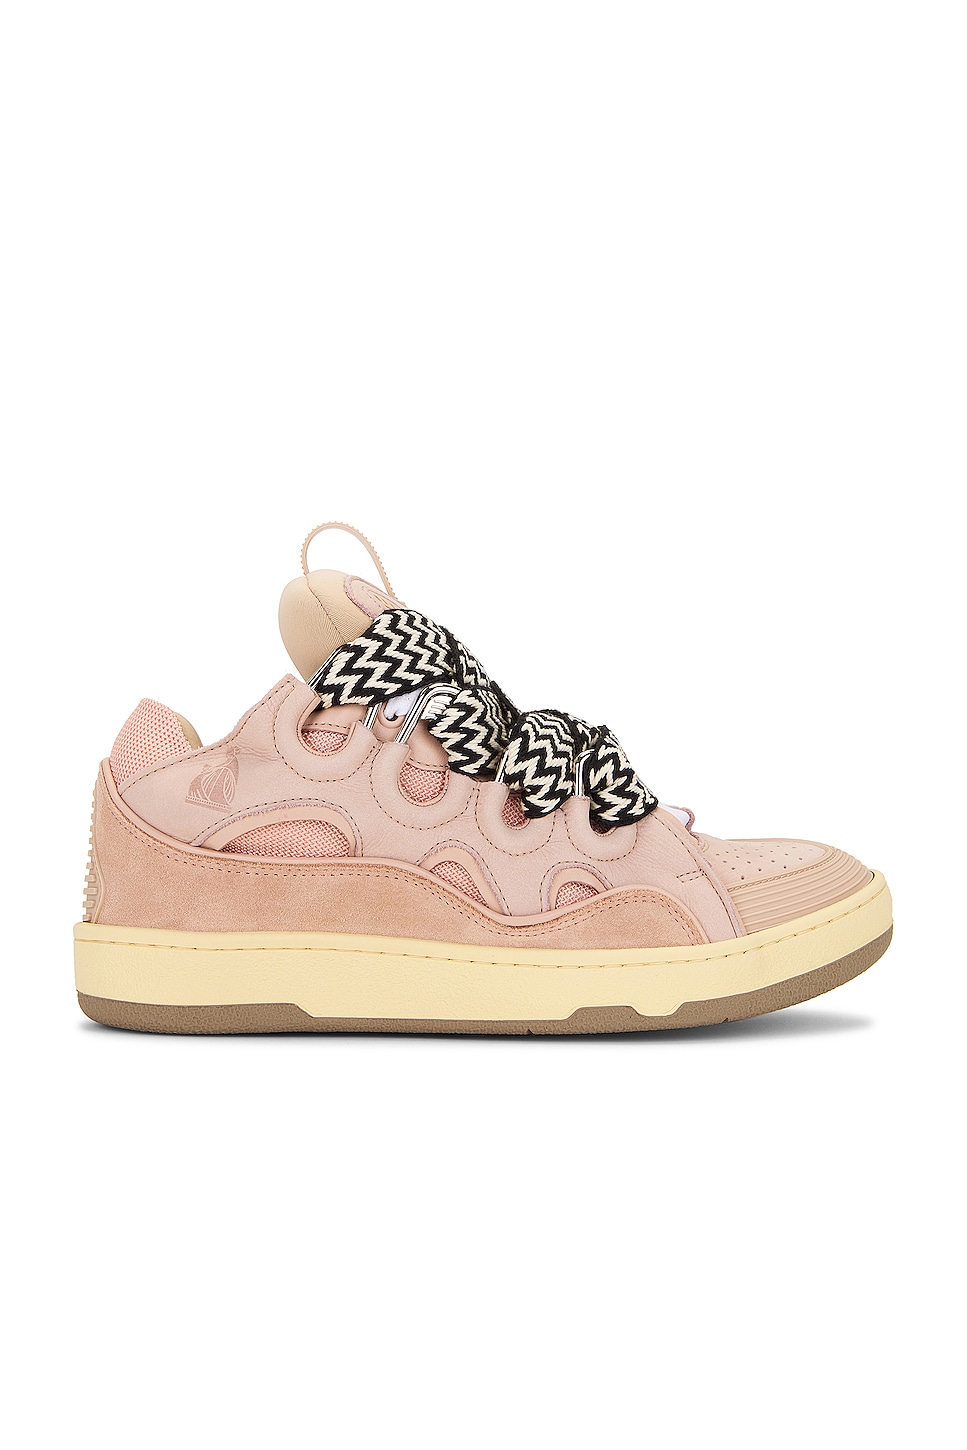 Image 1 of Lanvin Curb Sneaker in Pale Pink